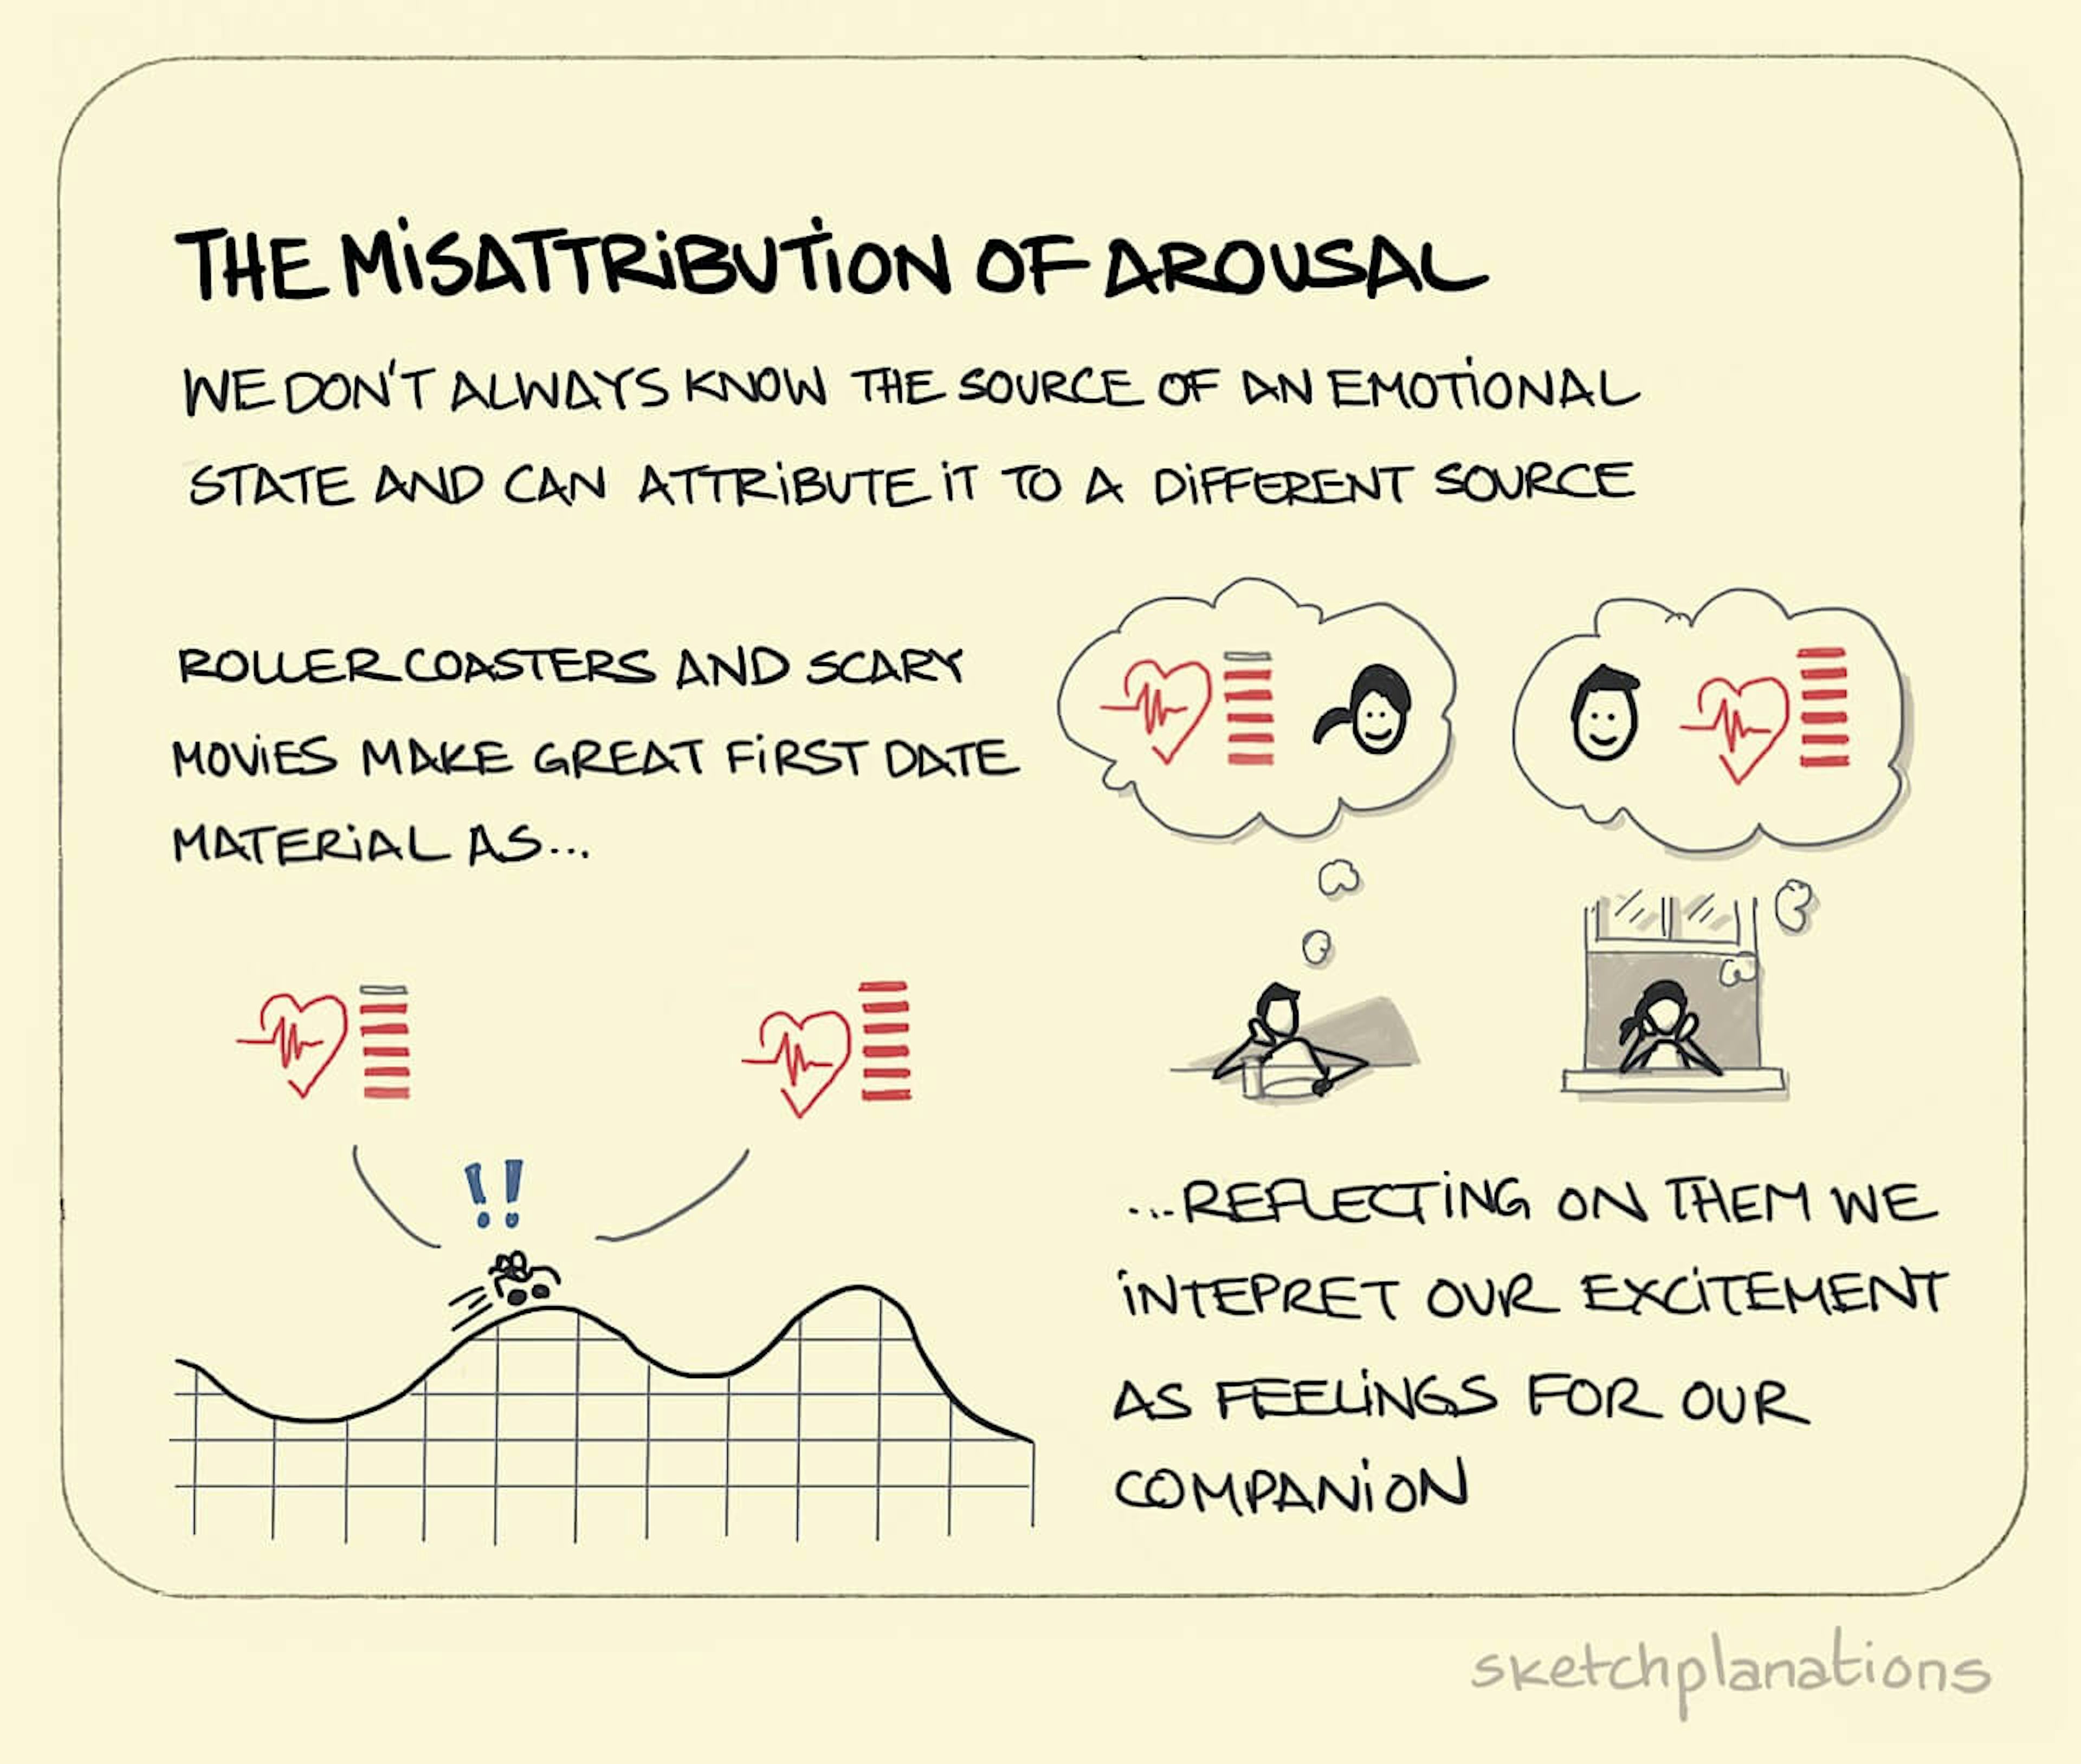 The Misattribution of Arousal illustration: a couple in the early stages of romance reflect on how excited they were to ride on a roller coaster together. Was the excitement due to each others' company or the roller coaster itself? Or maybe a bit of both? 